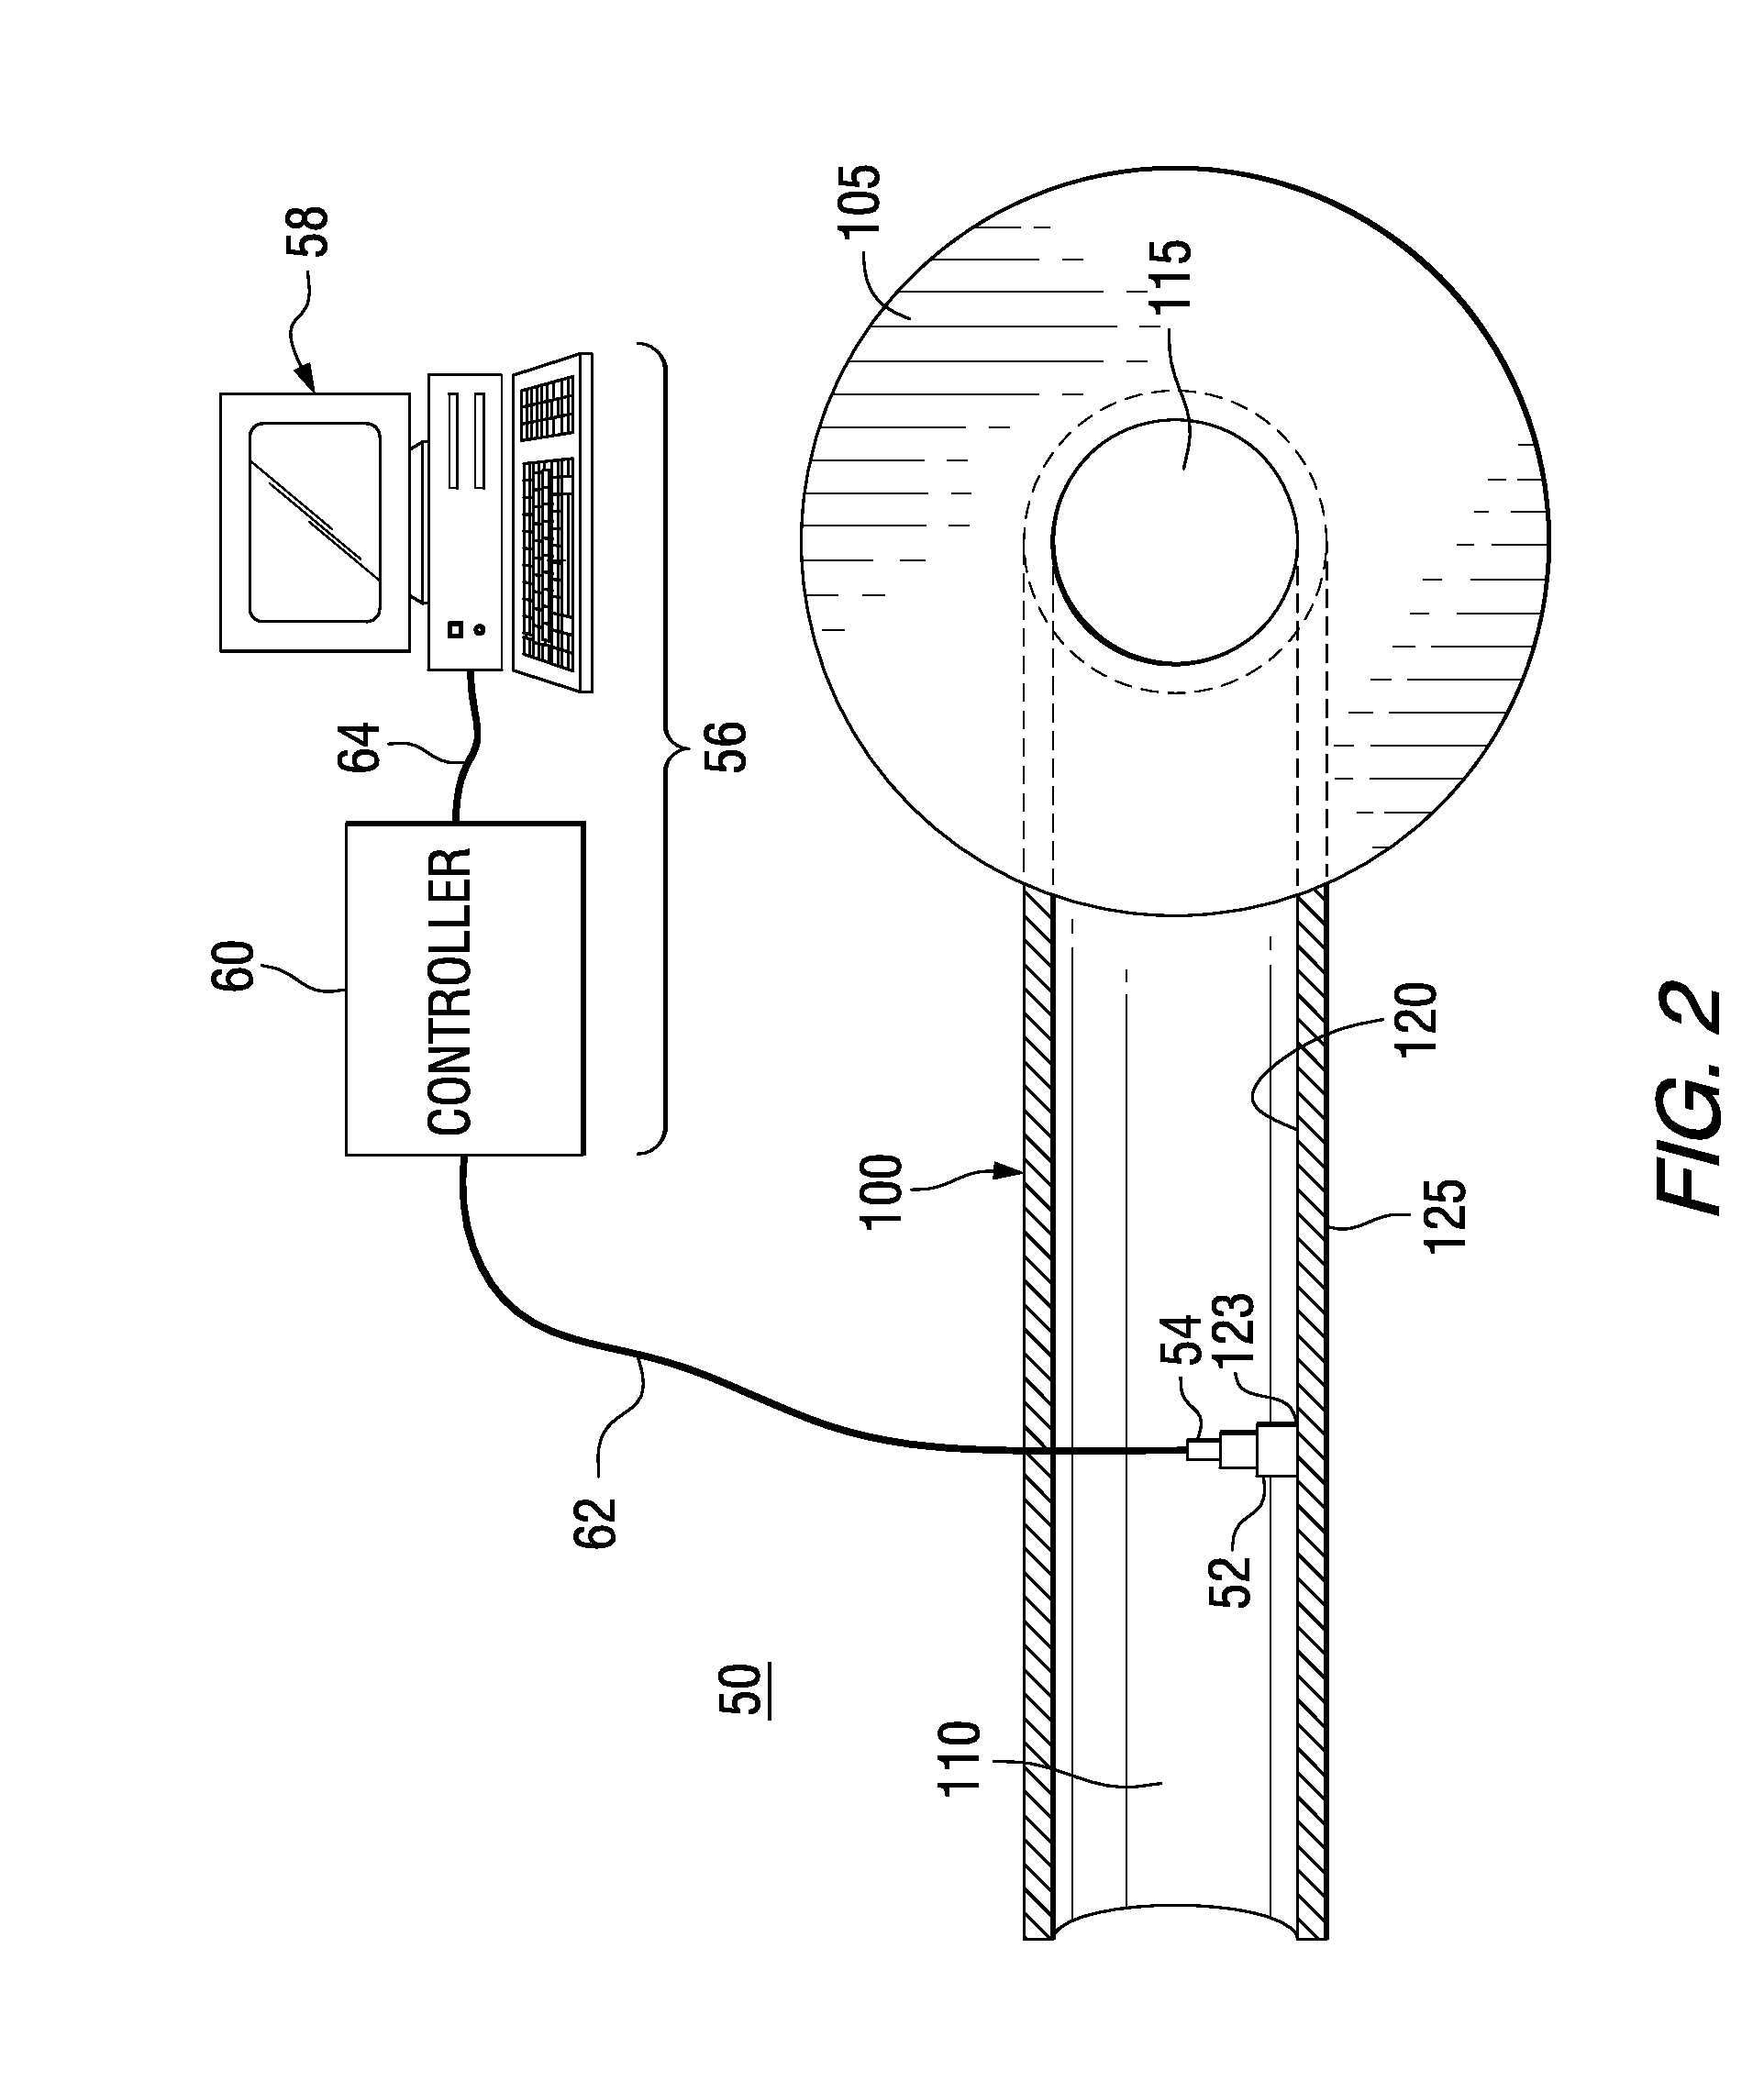 Phased array ultrasonic inspection system for turbine and generator rotor bore